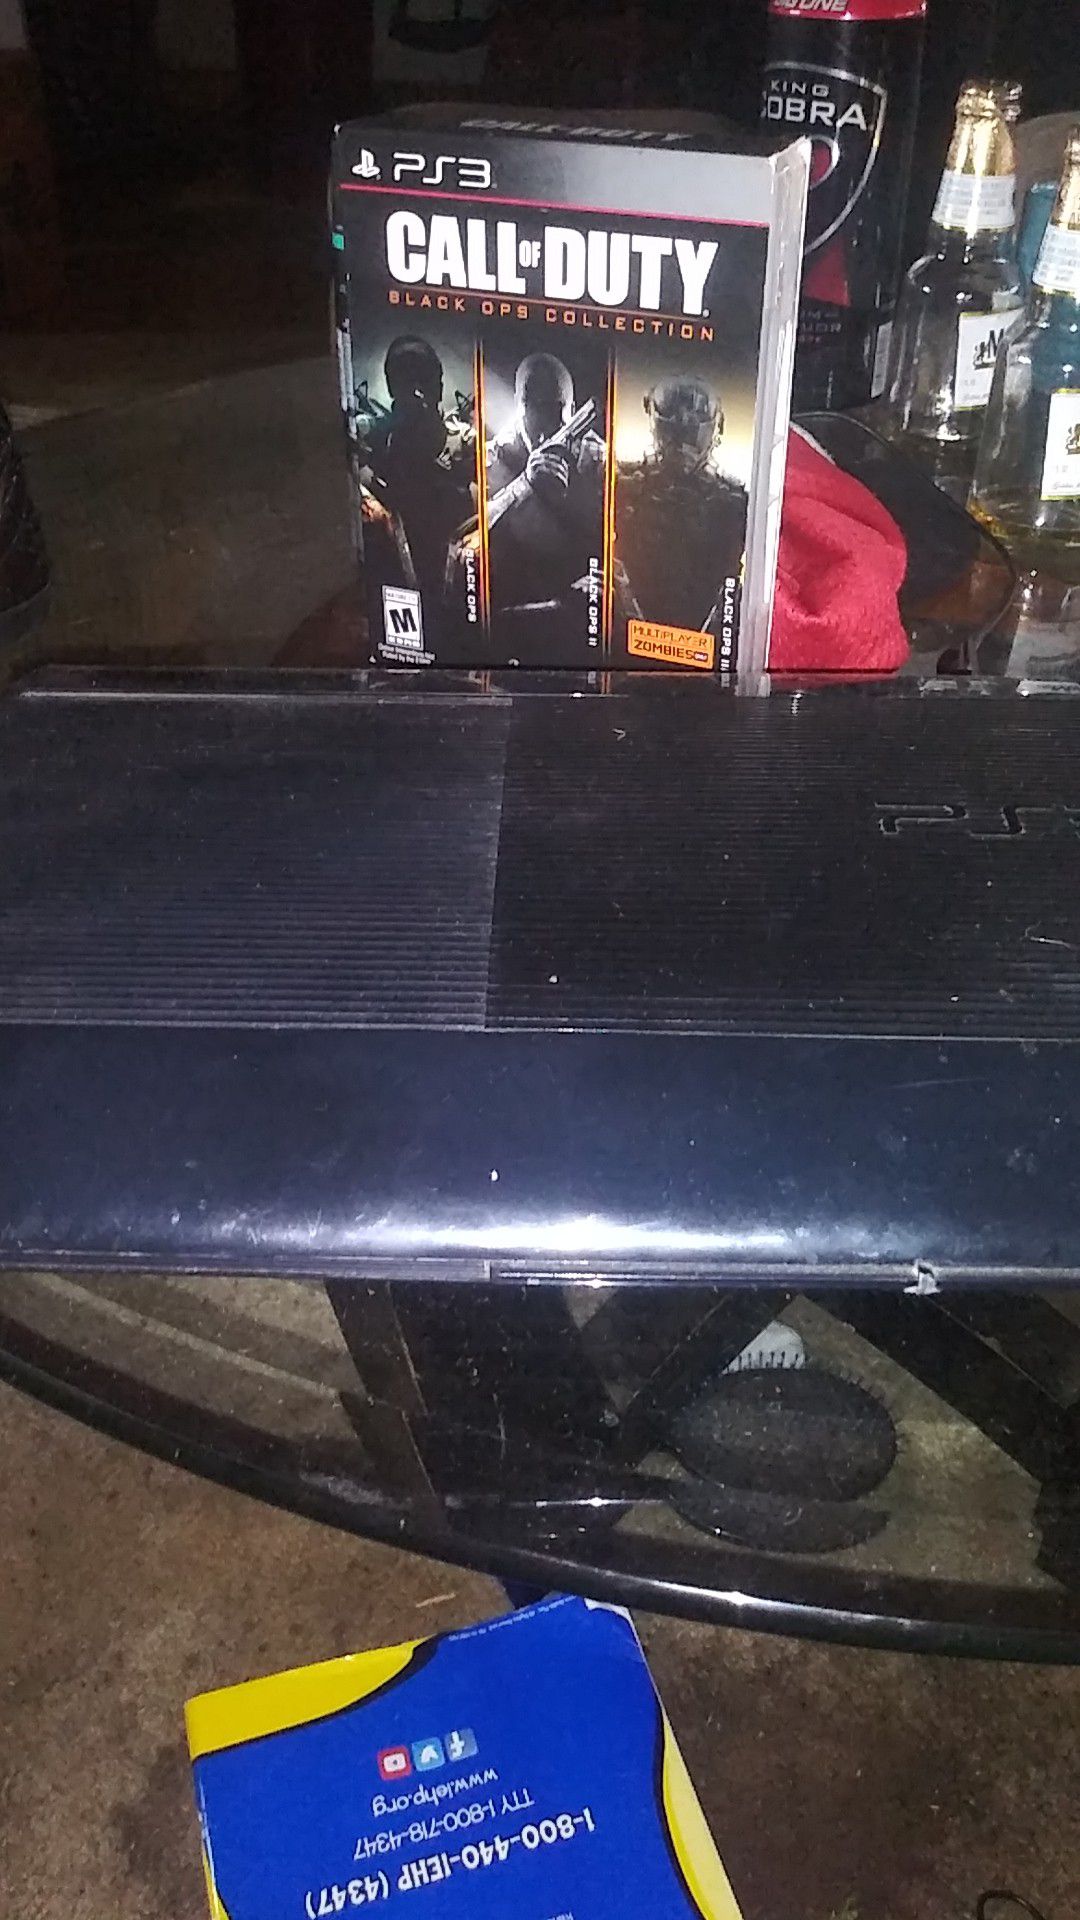 Ps3 the only thing its missing is comtrollers wich run about 12 20 bucks im will to trade for running moped or pocket bike